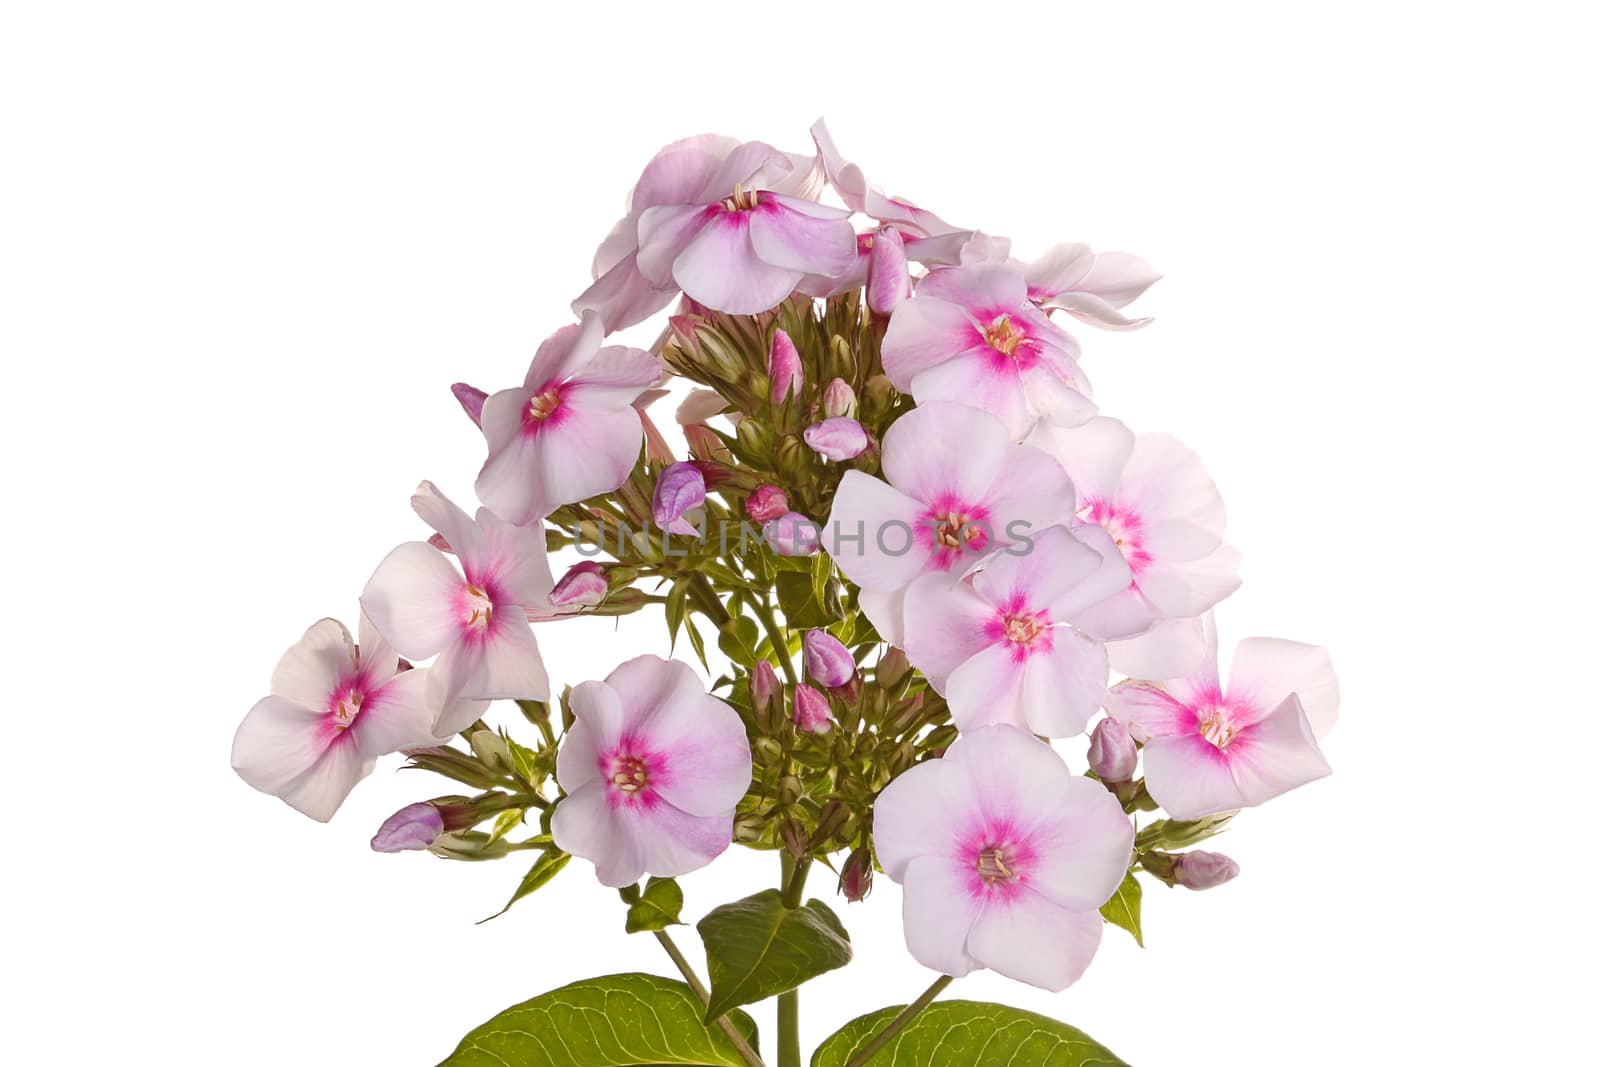 Cluster of white and pink phlox flowers on white by sgoodwin4813